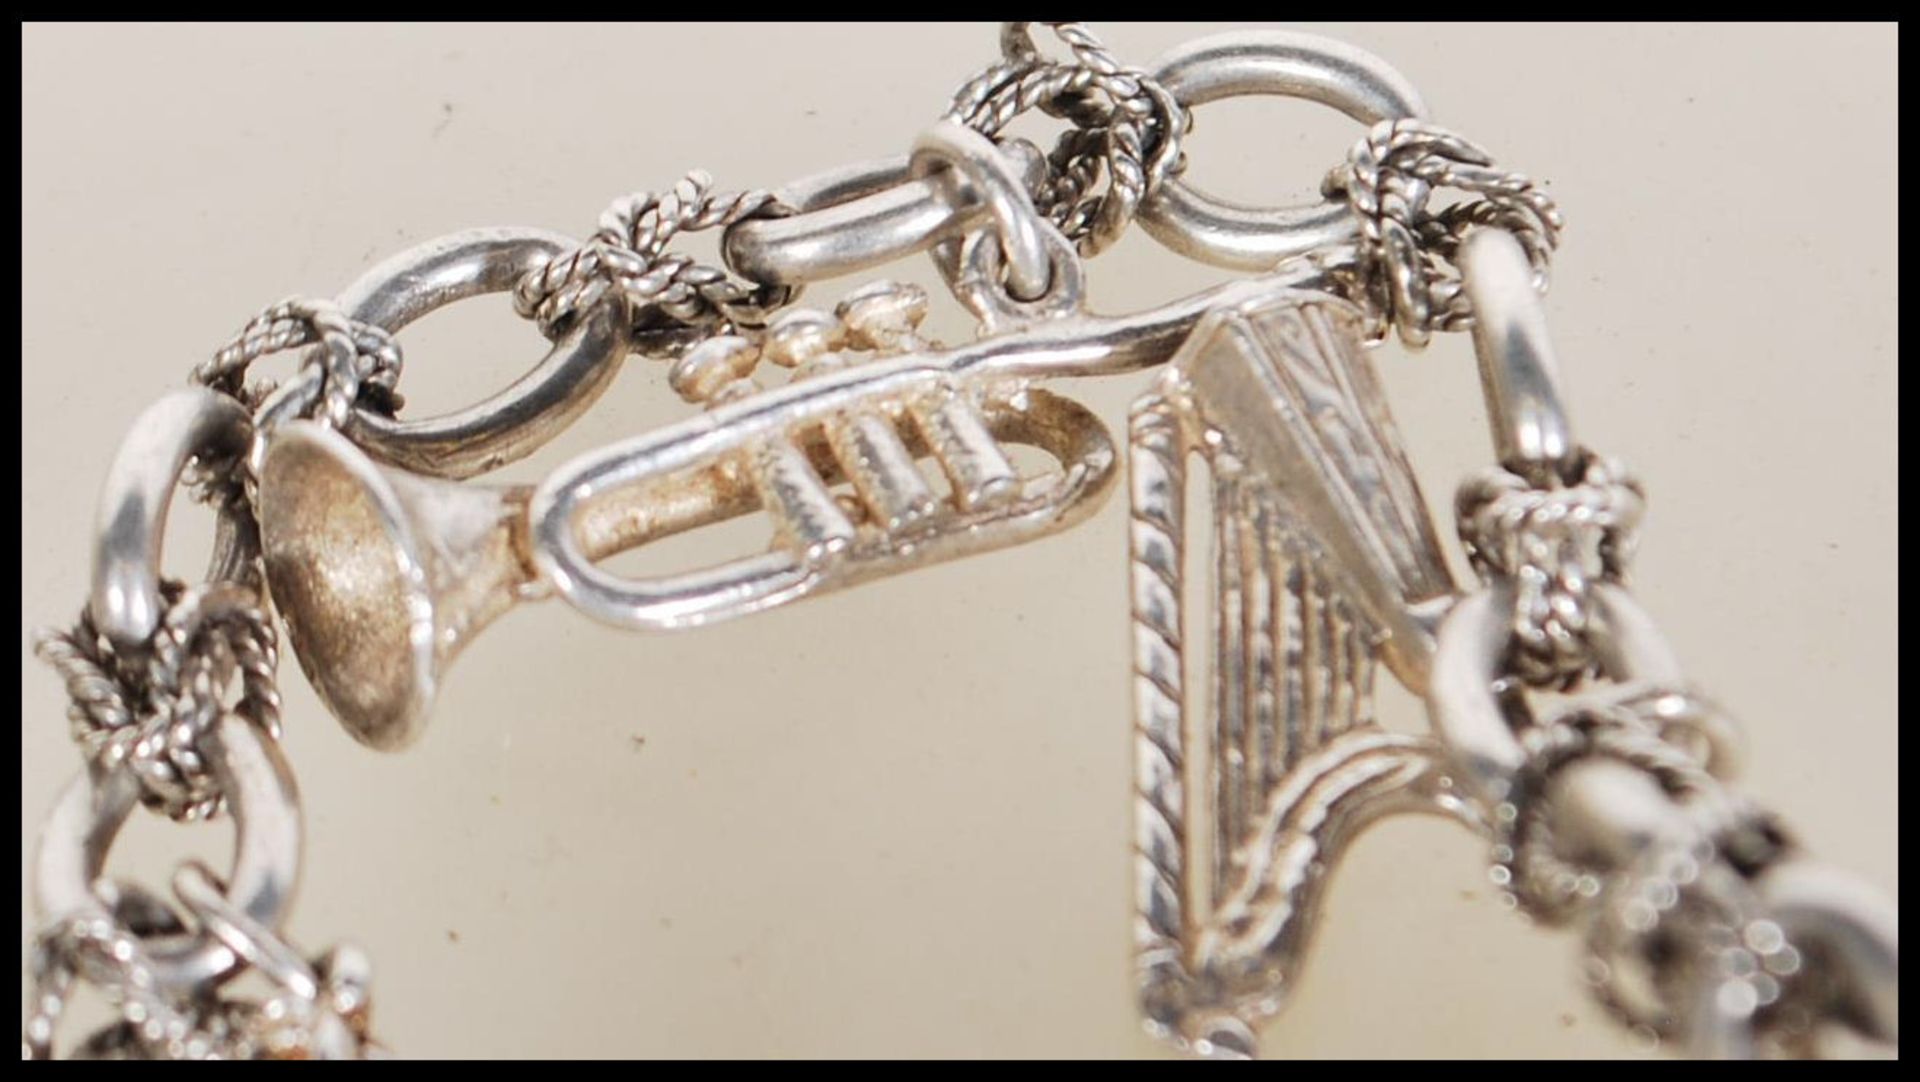 A silver charm bracelet having musical instrument charms to include trumpets, harp, bell violin, - Image 8 of 9